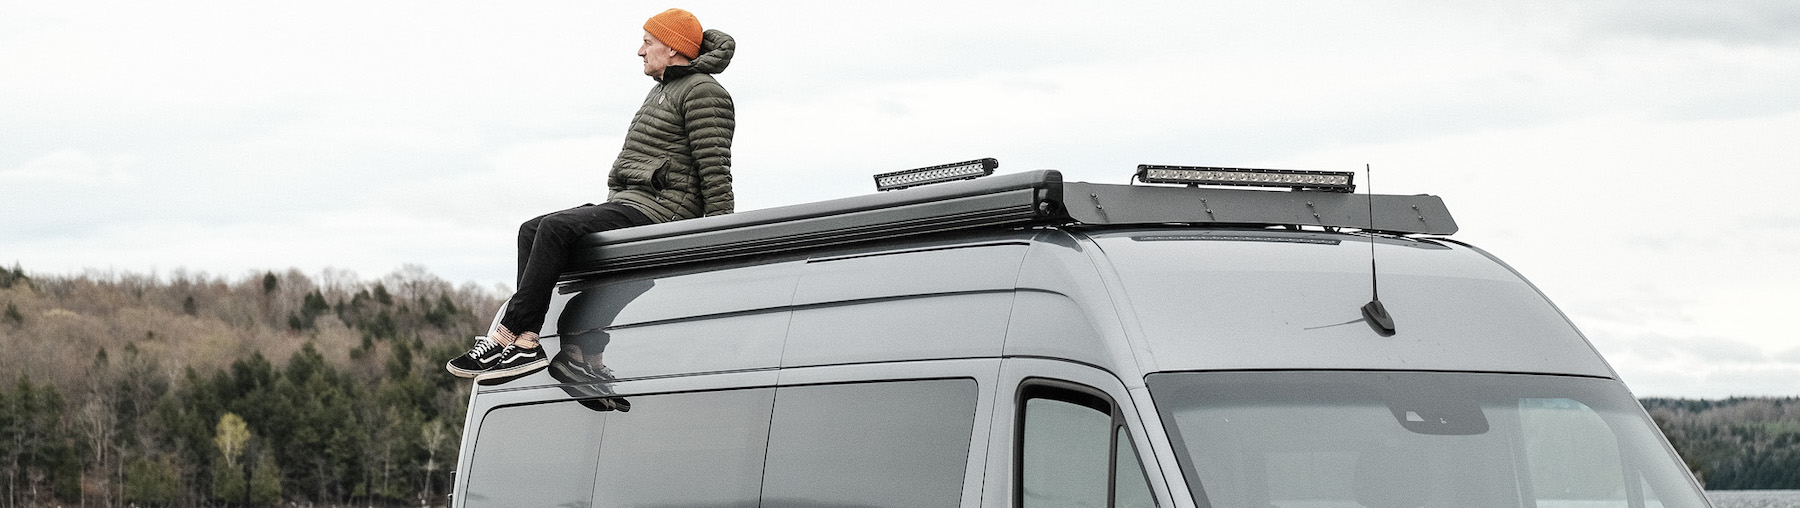 Ready to hit the road? Here are 5 must-have accessories for your van